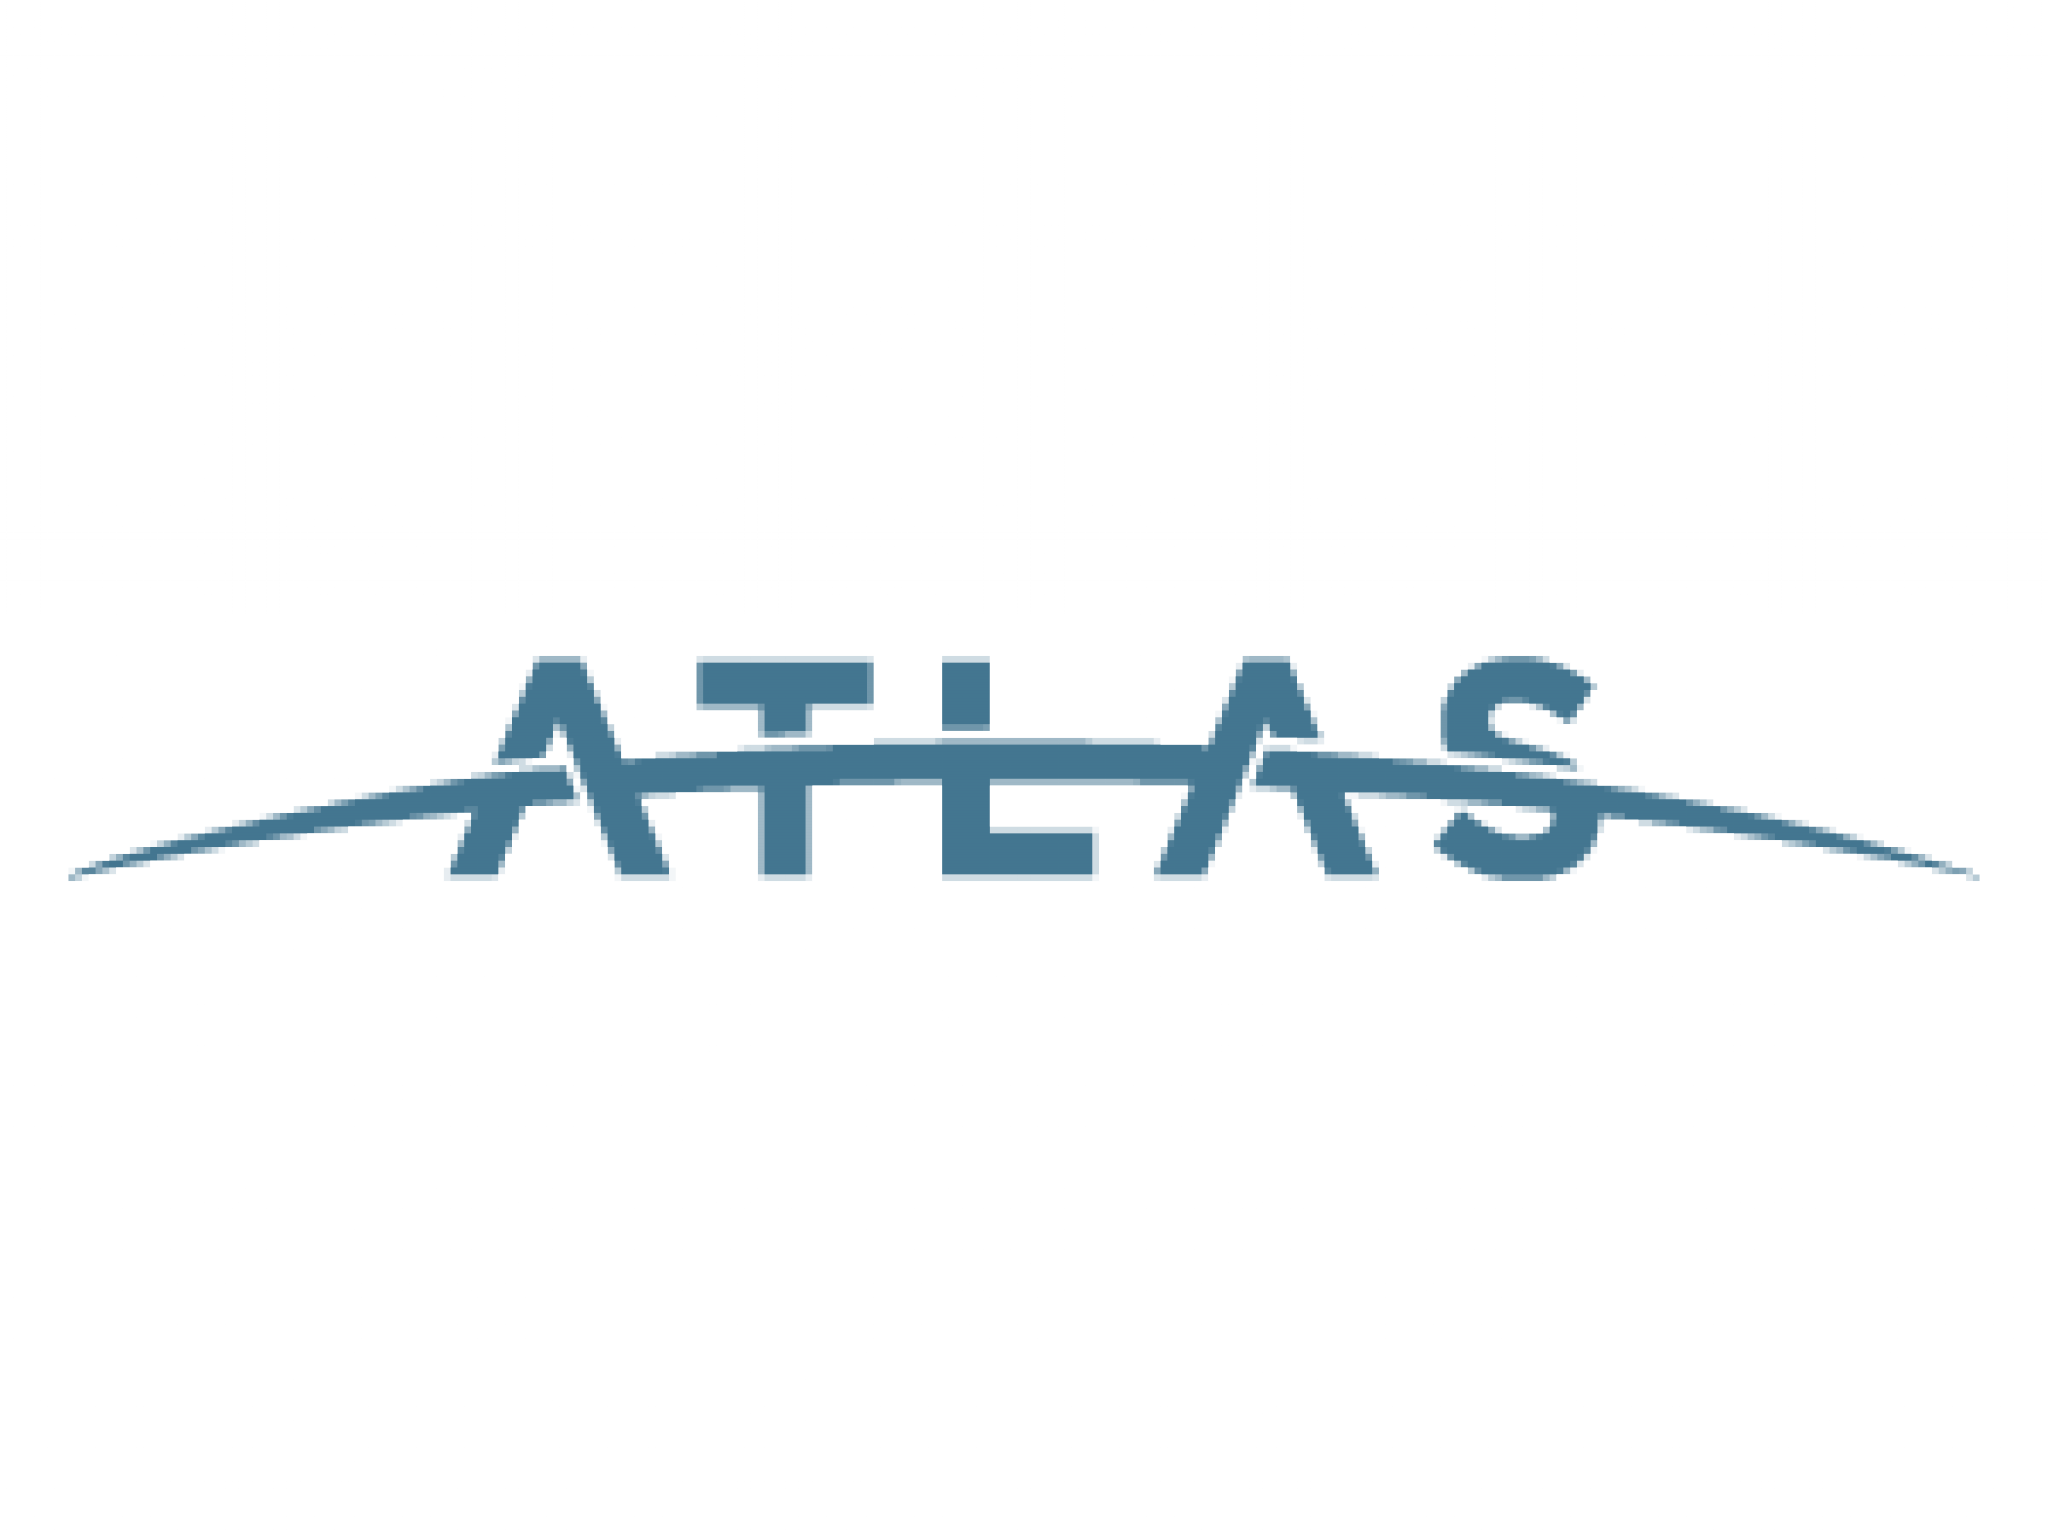  atlas-technical-consultants-stock-jumps-as-it-agrees-to-go-private-at-124-premium 